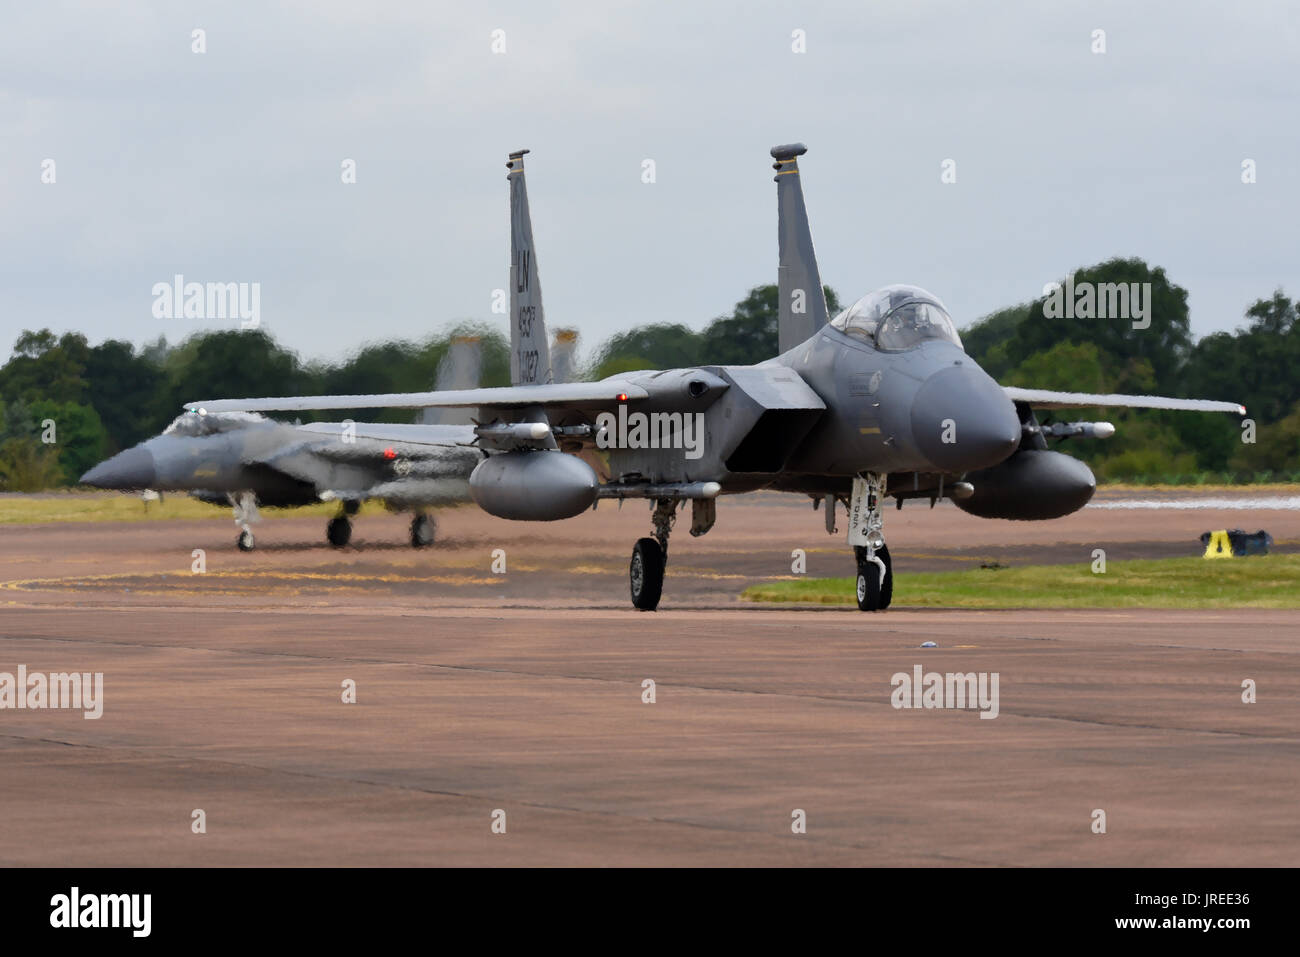 US Air Force F-15C Eagle fighters of the 493rd Fighter Squadron, 48th Fighter Wing based at RAF Lakenheath. Nicknamed the Grim Reapers. Space for copy Stock Photo